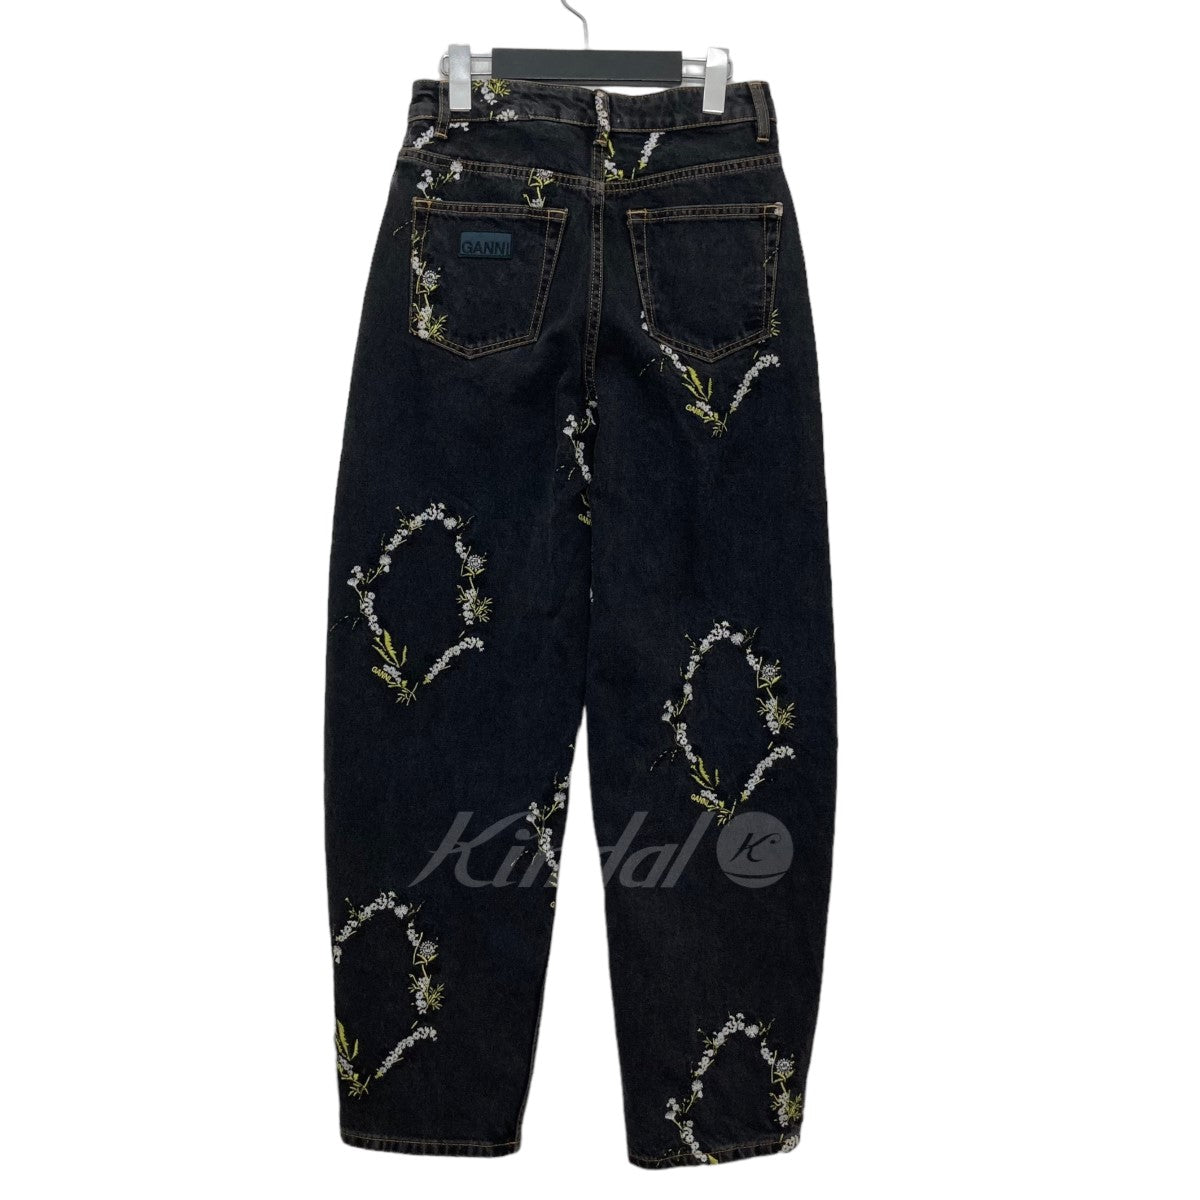 Stary Jeans Embroidery 花柄刺繍デニムパンツ